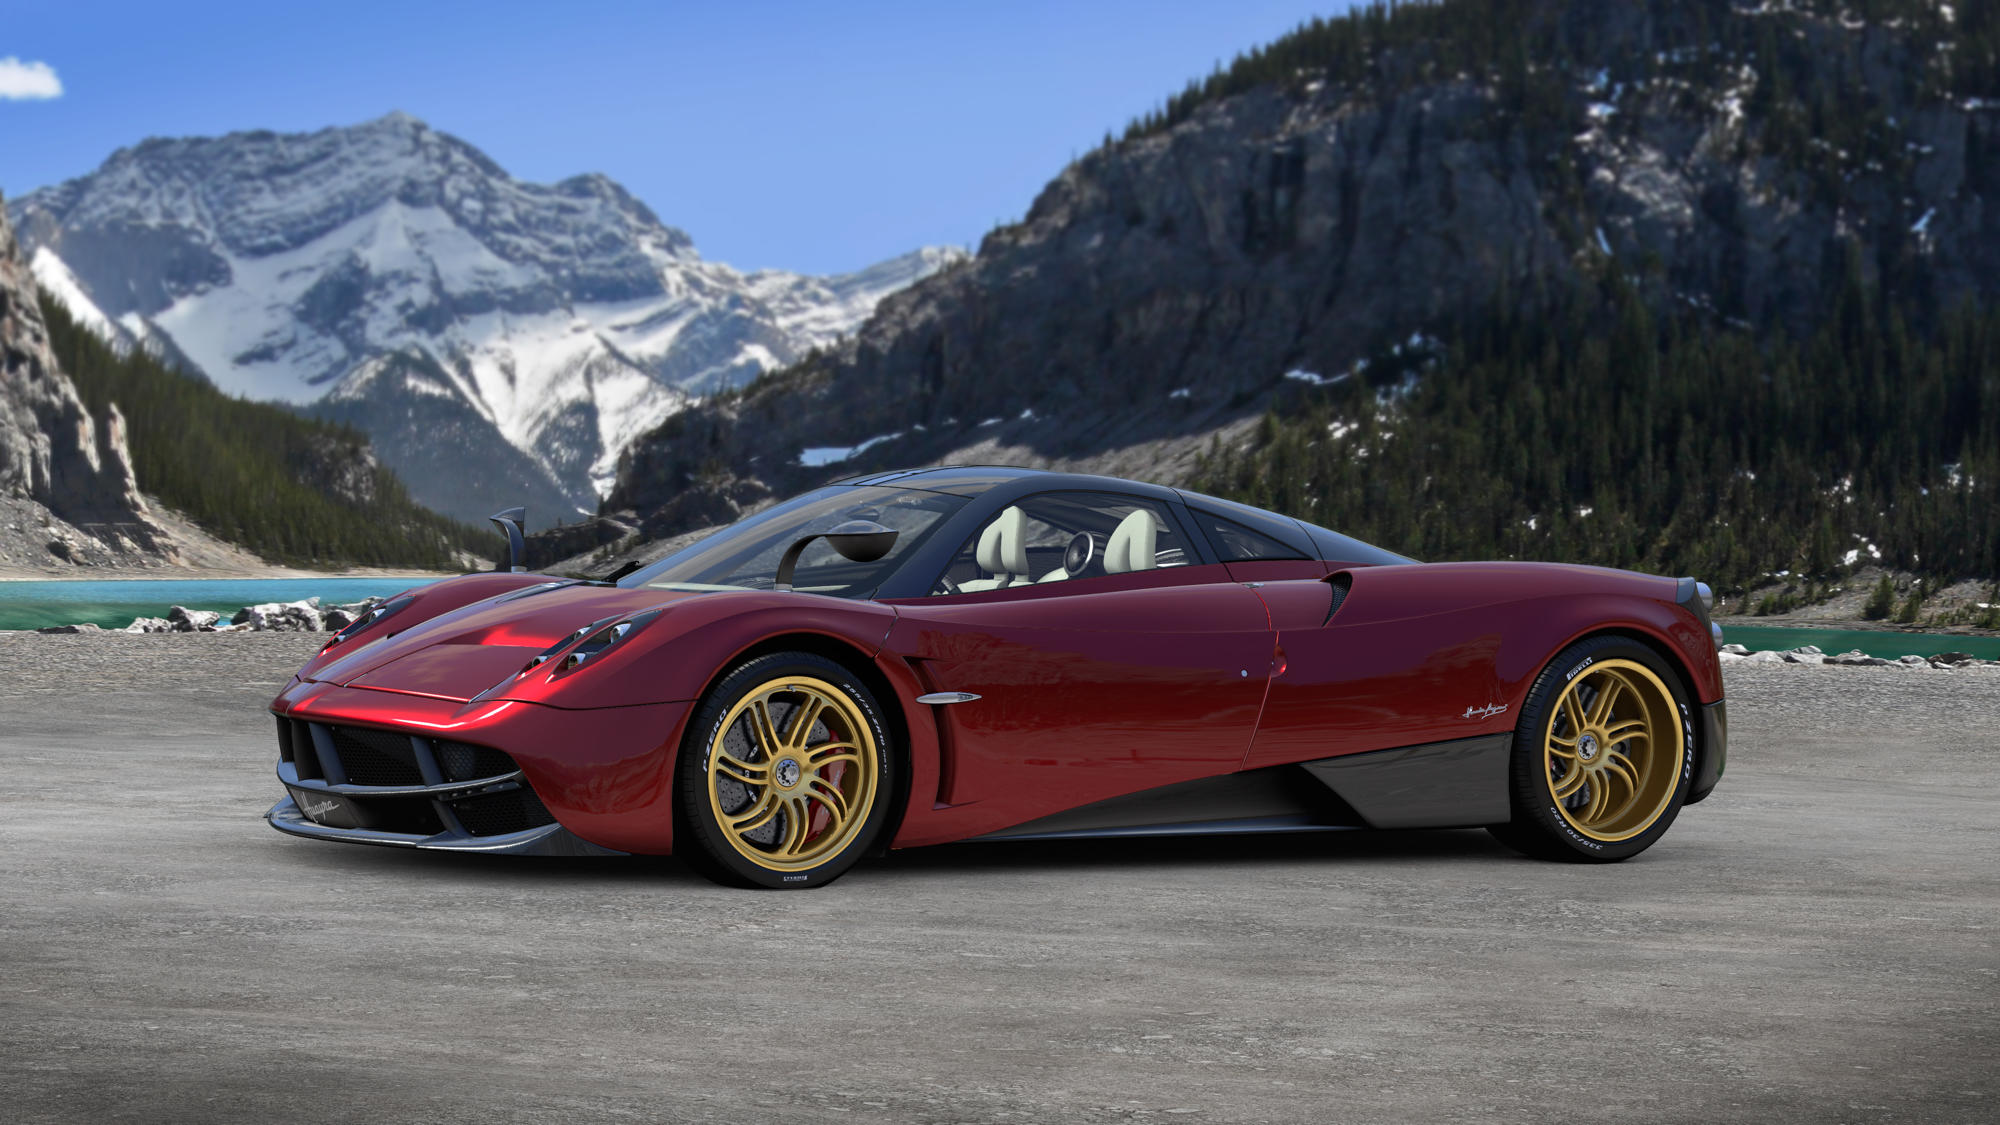 Pagani Profile (Red & Carbon) Gold Wheels_rz